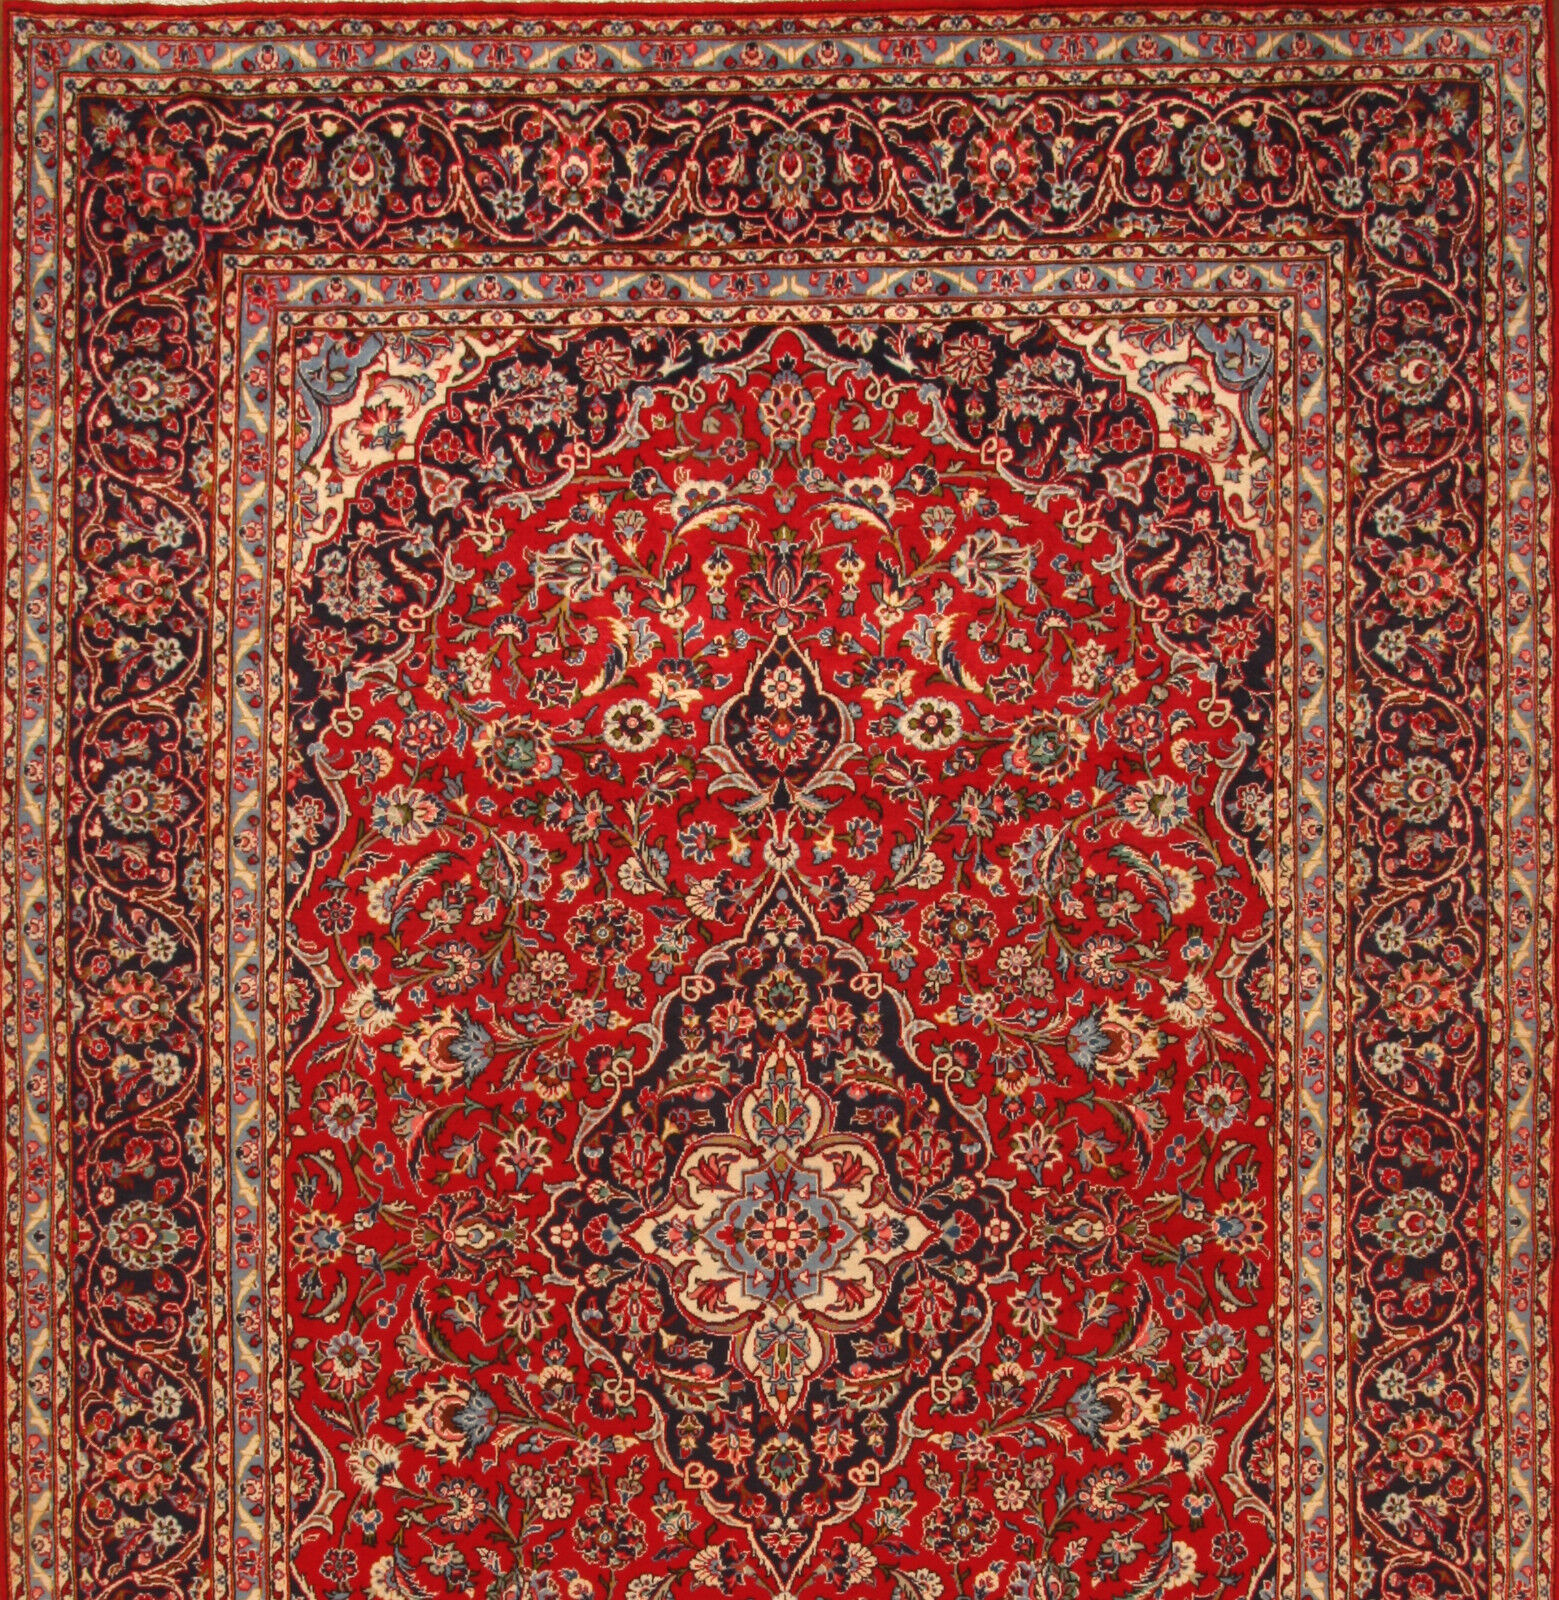 Artistic display of the Handmade Vintage Persian Style Kashan Rug as a room centerpiece